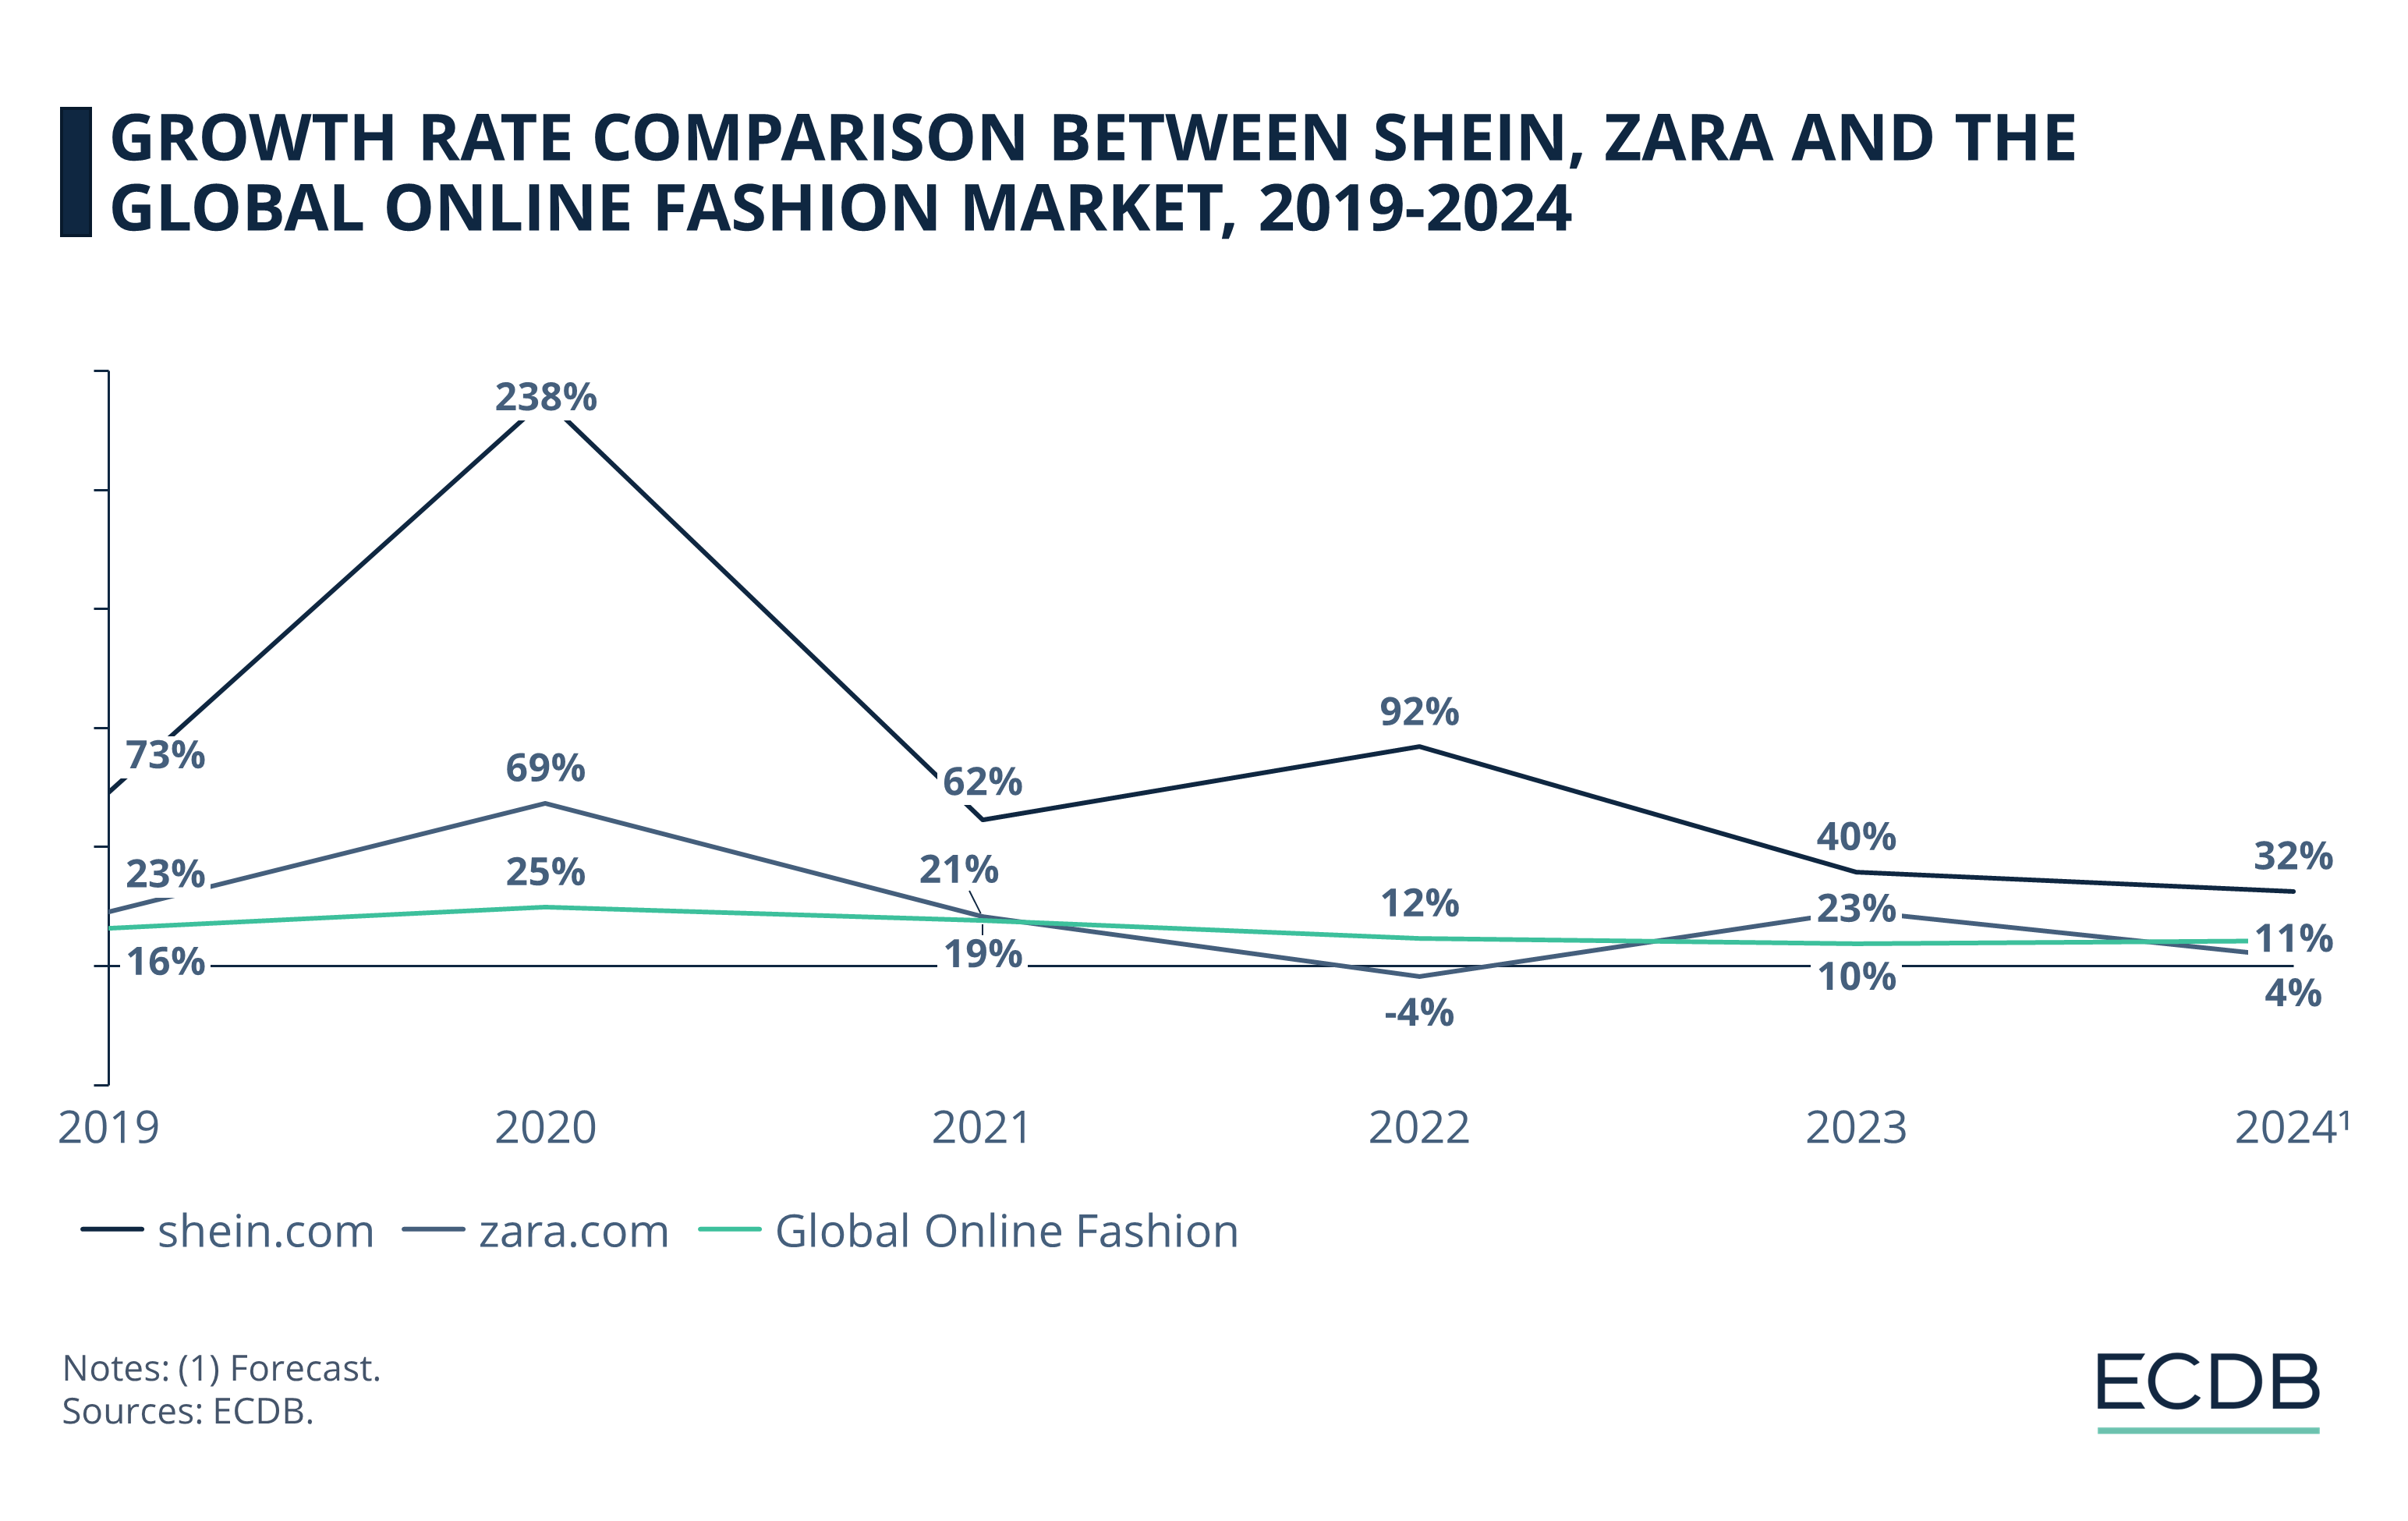 Growth Rate Comparison Between Shein, Zara and the Global Online Fashion Market, 2019-2024